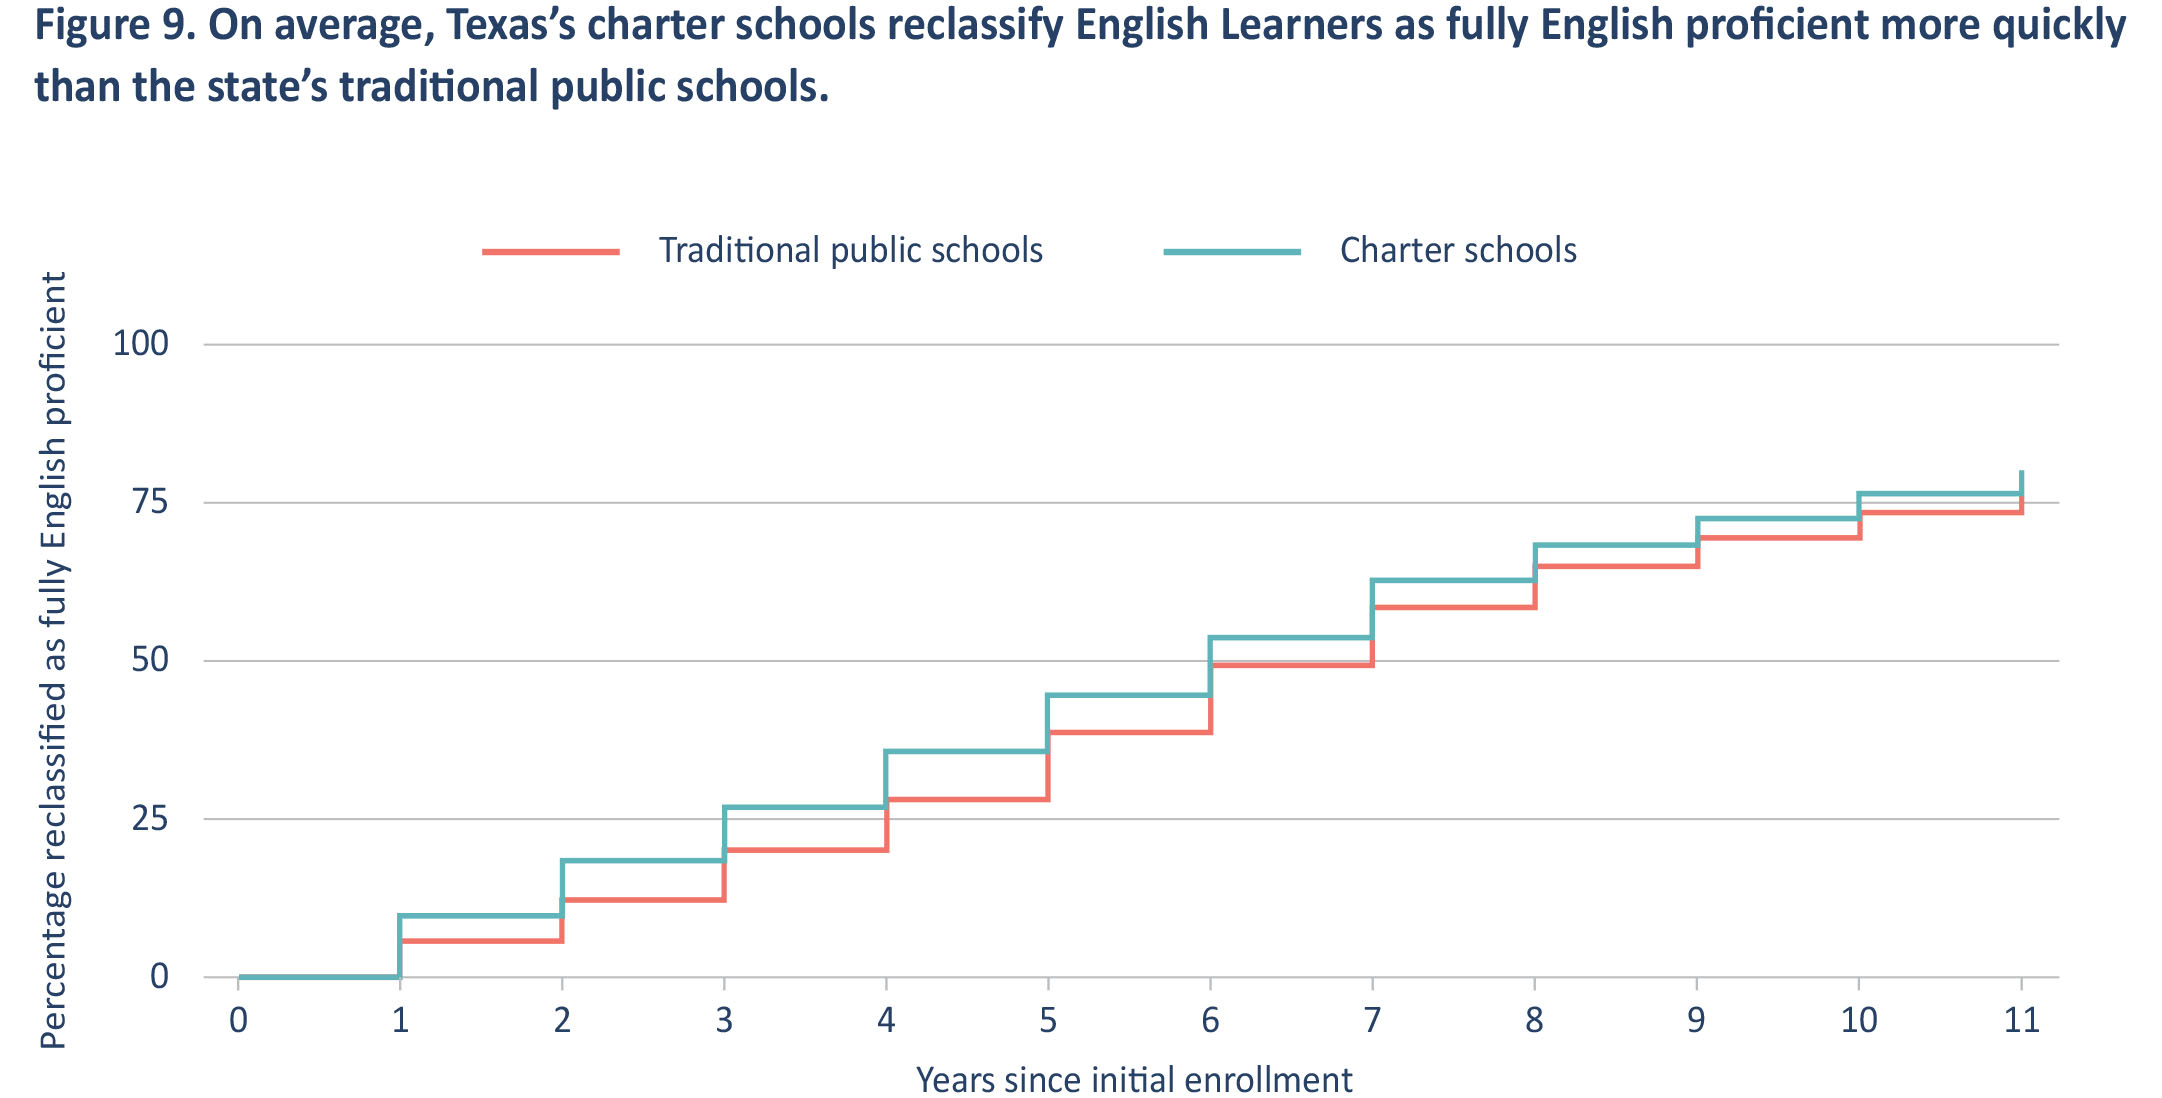 Figure 9. On average, Texas's charter schools reclassify English Learners as fully English proficient more quickly than the state's traditional public schools.